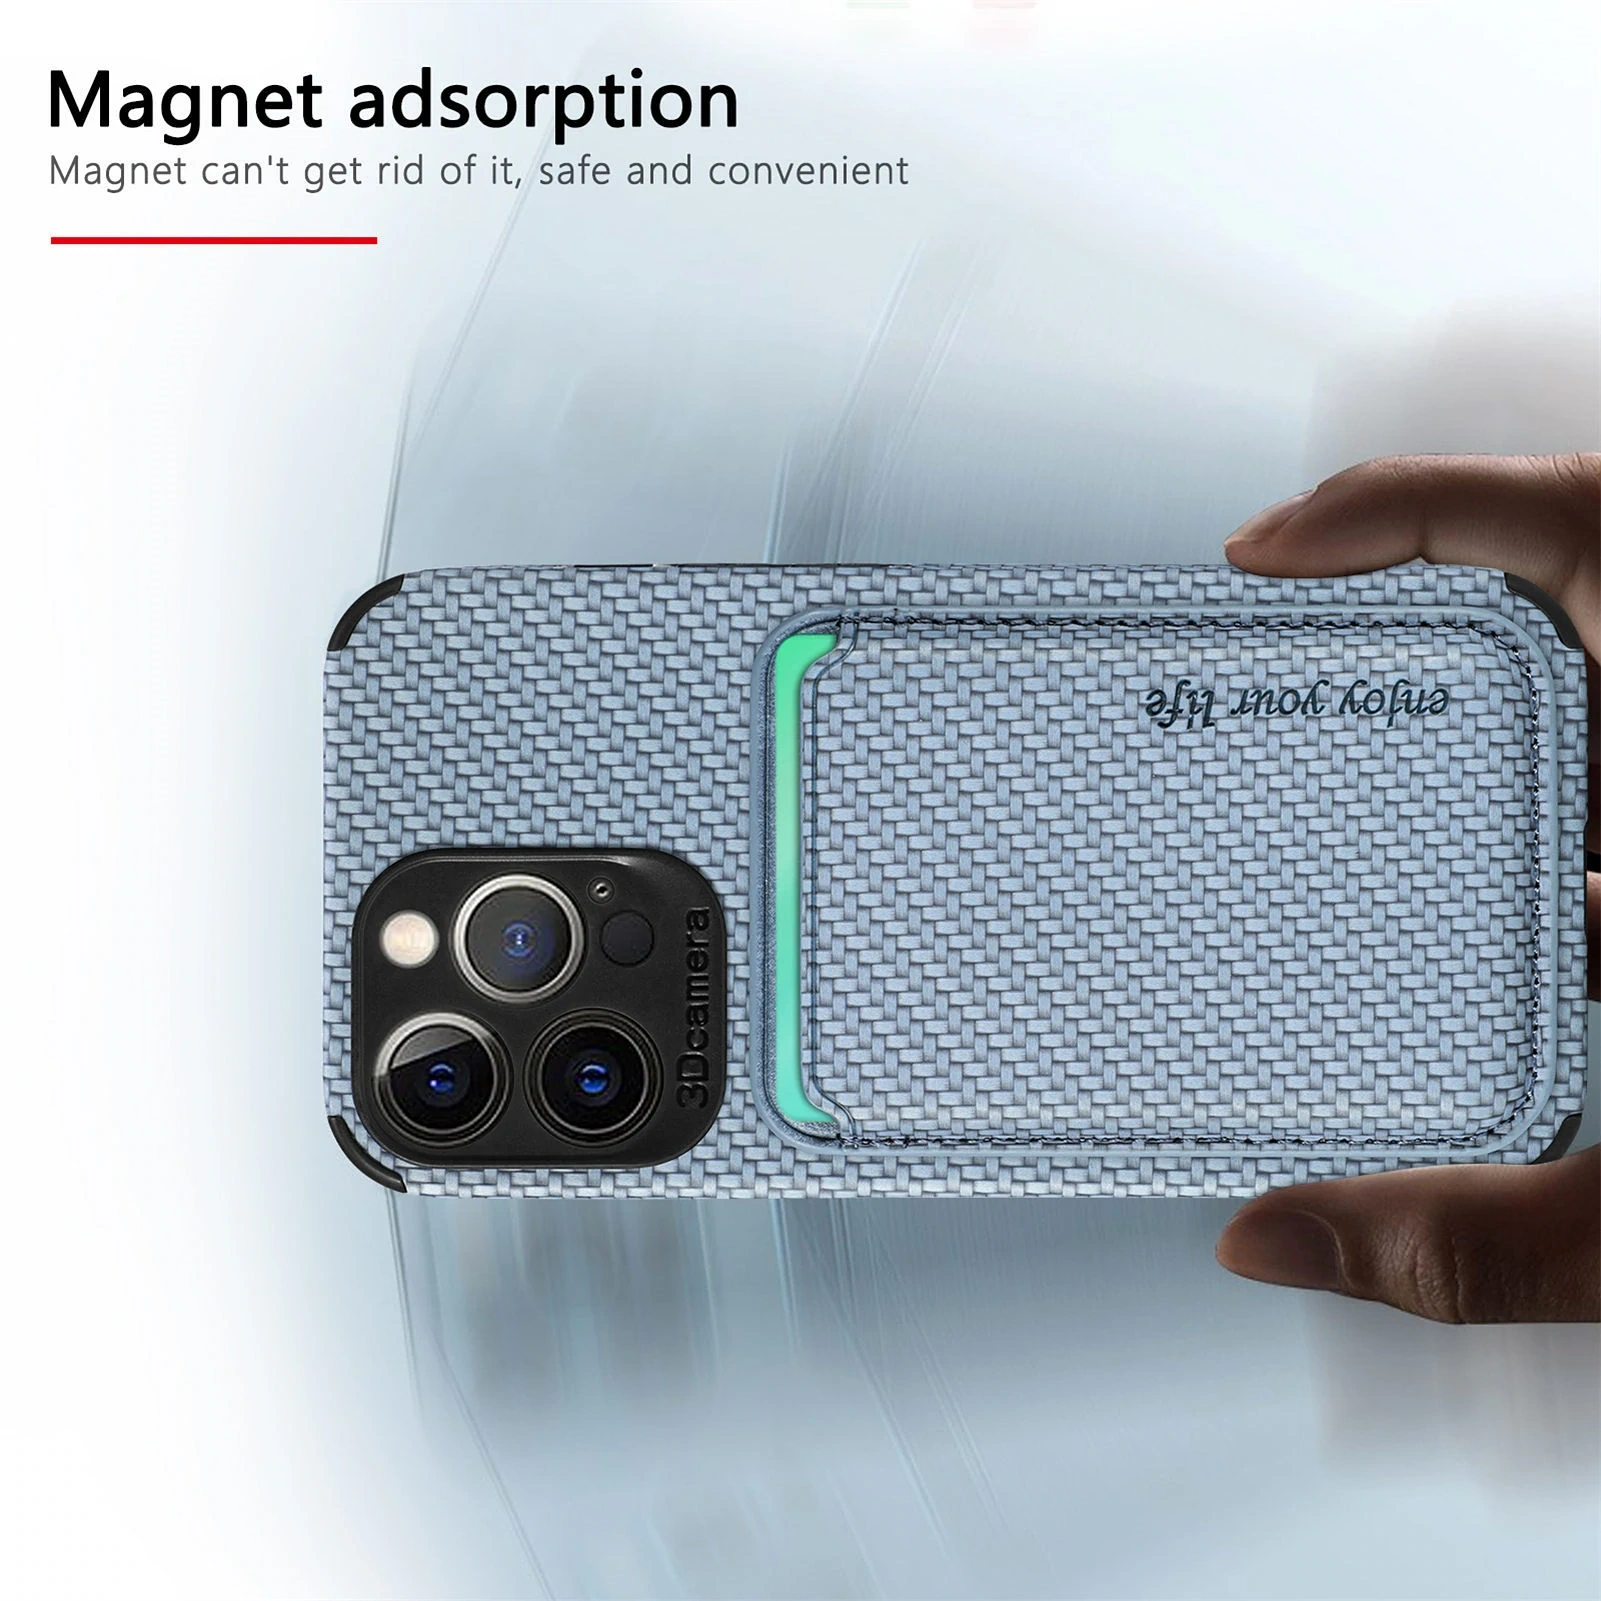 High quality carbon fiber phone case with Magsafe card holder